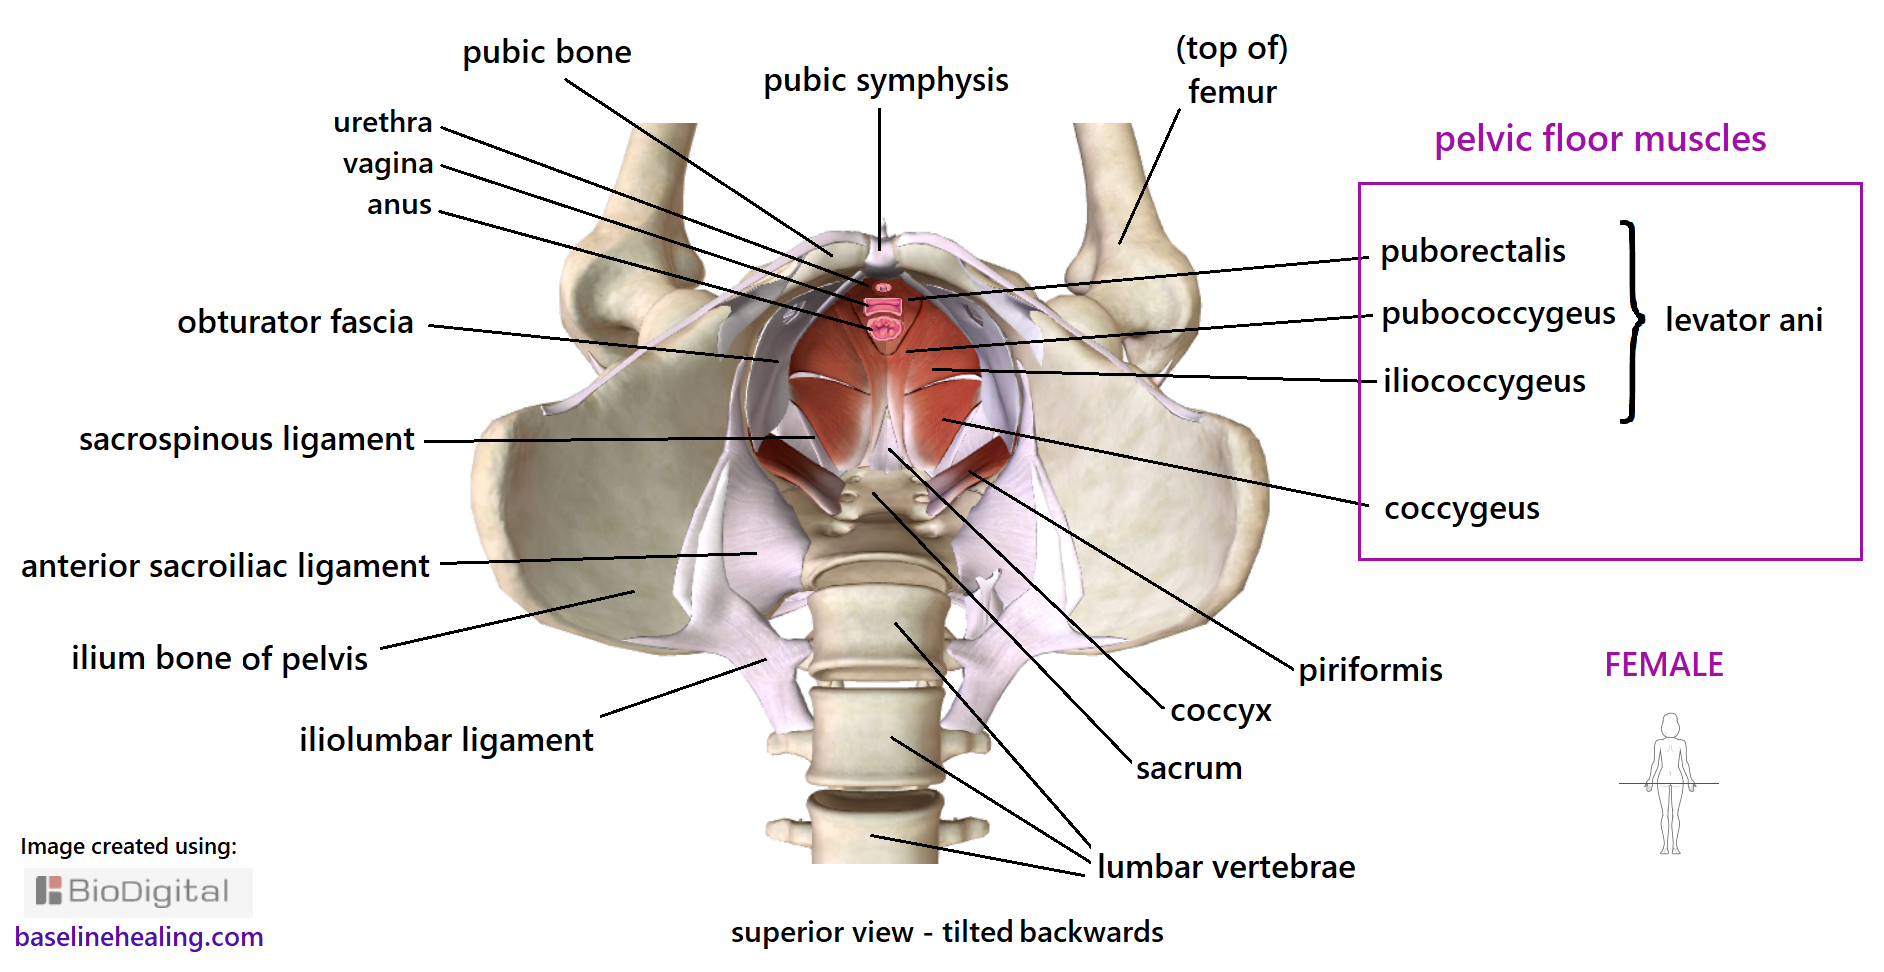 The female pelvis seen from above. Pelvic floor muscles, bones and connective tissues. Showing the ilium bones, the large wings of the pelvis and the smaller pubic bones at the front of the pelvis which are separated by the pubic symphyis on the body's midline. The sacrum and coccyx bones at at the back of the pelvis at the base of the spine. The levator ani muscles group is part of the pelvic floor, consisting of 3 muscles on either side of midline - the puborectalis, pubococcygeus and iliococcygeus muscles. The puborectalis muscles are small and located at the front of the pelvic floor, surrounding the anus, vagina and urethral openings and  are named for its proximity to the pubic bone and anus. The pubococcygeus muscles attach to the pubic bones and the coccyx. They are like ribbons forming an X-shape from front to back of the pelvic canal, either side of midline. The iliococcygeus muscles are the biggest of the levator ani muscles, wide and thin and most of the front half of the pelvic floor meeting . The coccygeus muscles make up the back half of the pelvic floor meeting with the bottom half of the X of the pubococcygeus. The coccygeus and iliococcygeu are similar in shape wide and flat. Several connective tissue structures are also labelled. The anterior sacroiliac ligament, a broad sheet of connective tissue attaching to the inside of the wings of the ilium and to the sacrum.  The iliolumbar ligament also attaches to the wings of the ilium but then extends higher to the lumbar vertebrae.  The obturator fascia covers the inside of the front portions of the pelvic canal. Also shown the part of the piriformis muscle that is within the pelvic canal. The piriformis goes through the greater sciatic foramen.  A lot of complex anatomy, layered and blending with the pelvic floor as the muscular base of the body.